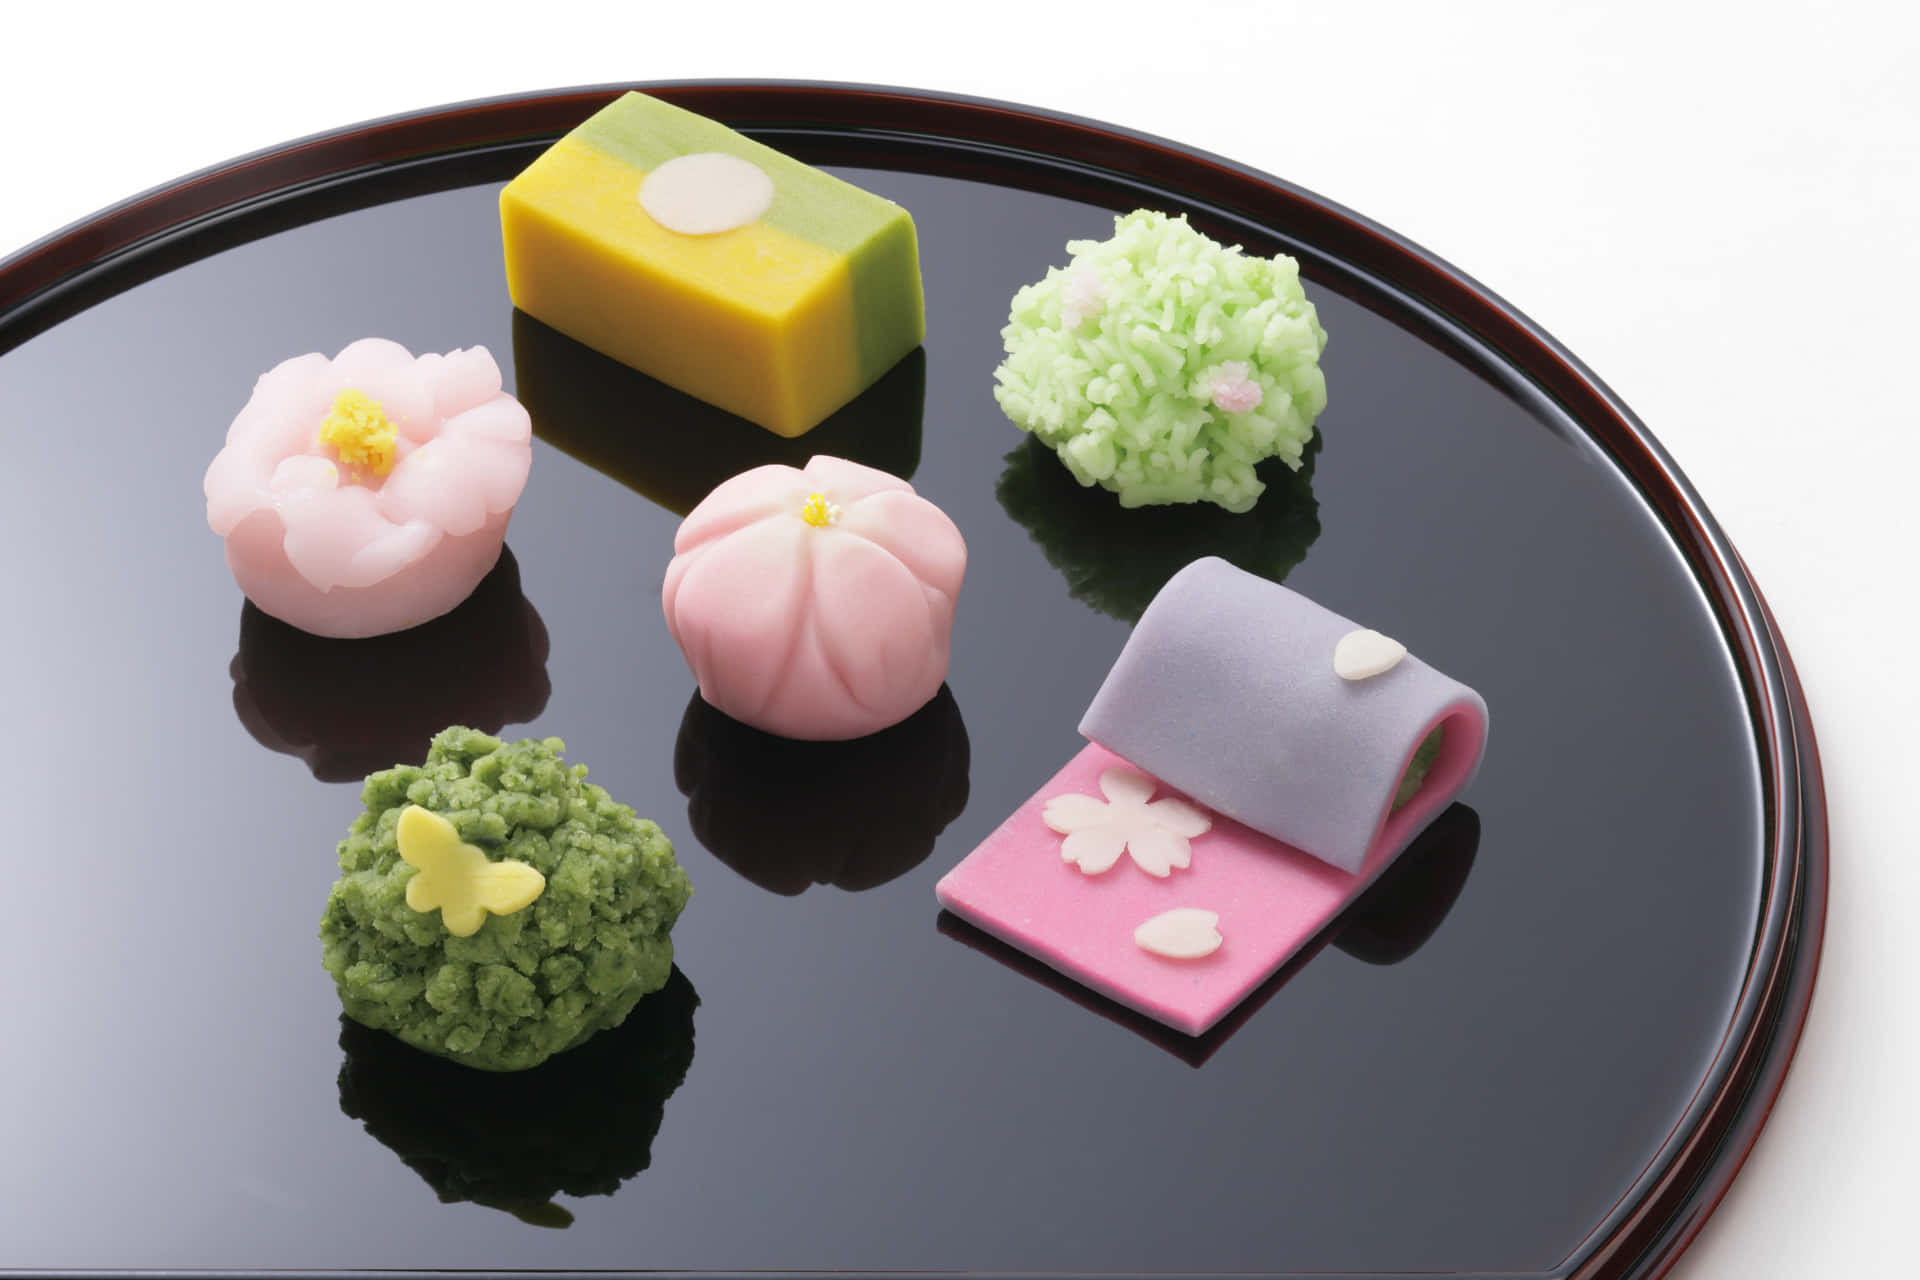 A delightful variety of colorful Japanese sweets served on elegant dishes. Wallpaper